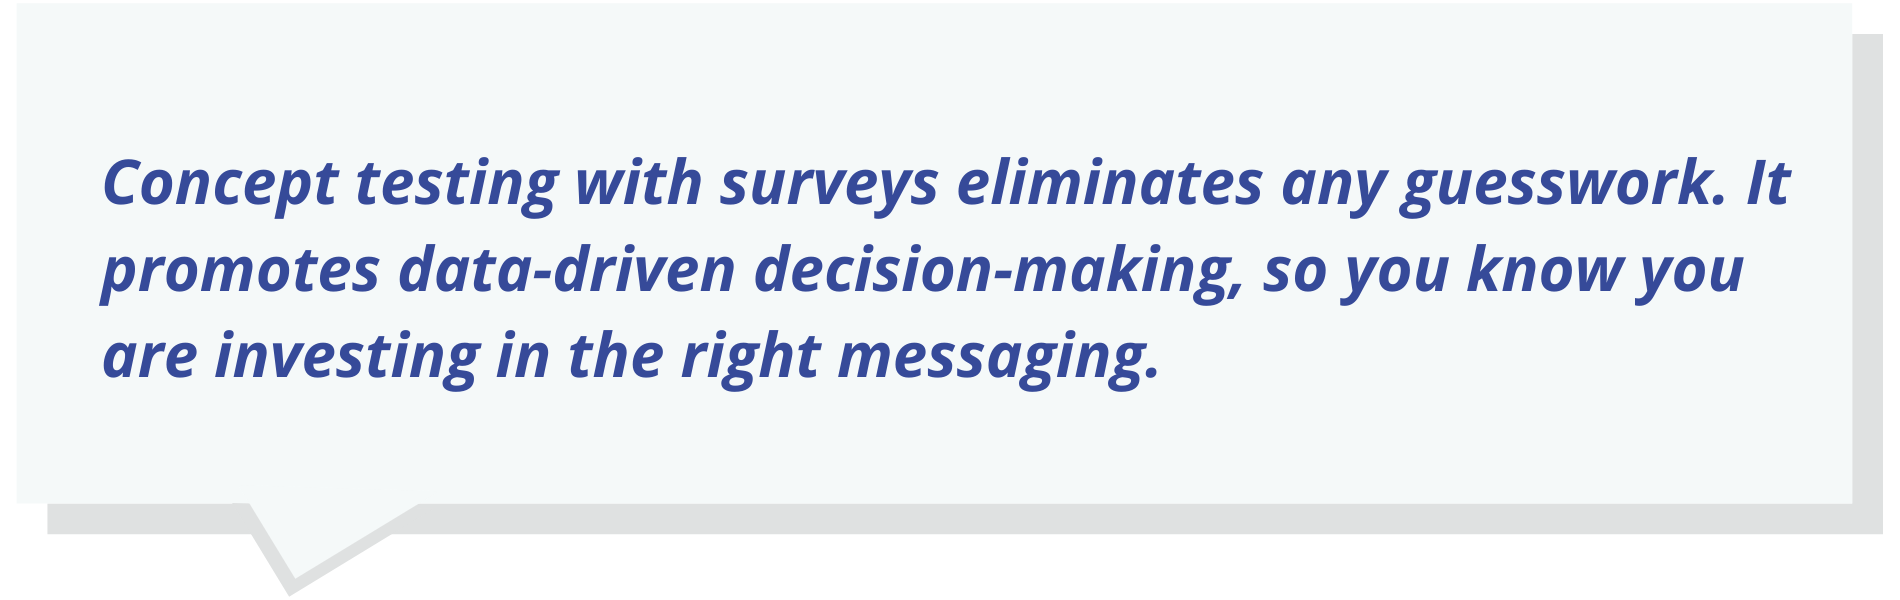 Concept testing with surveys eliminates any guesswork. It promotes data-driven decision-making, so you know you are investing in the right messaging.